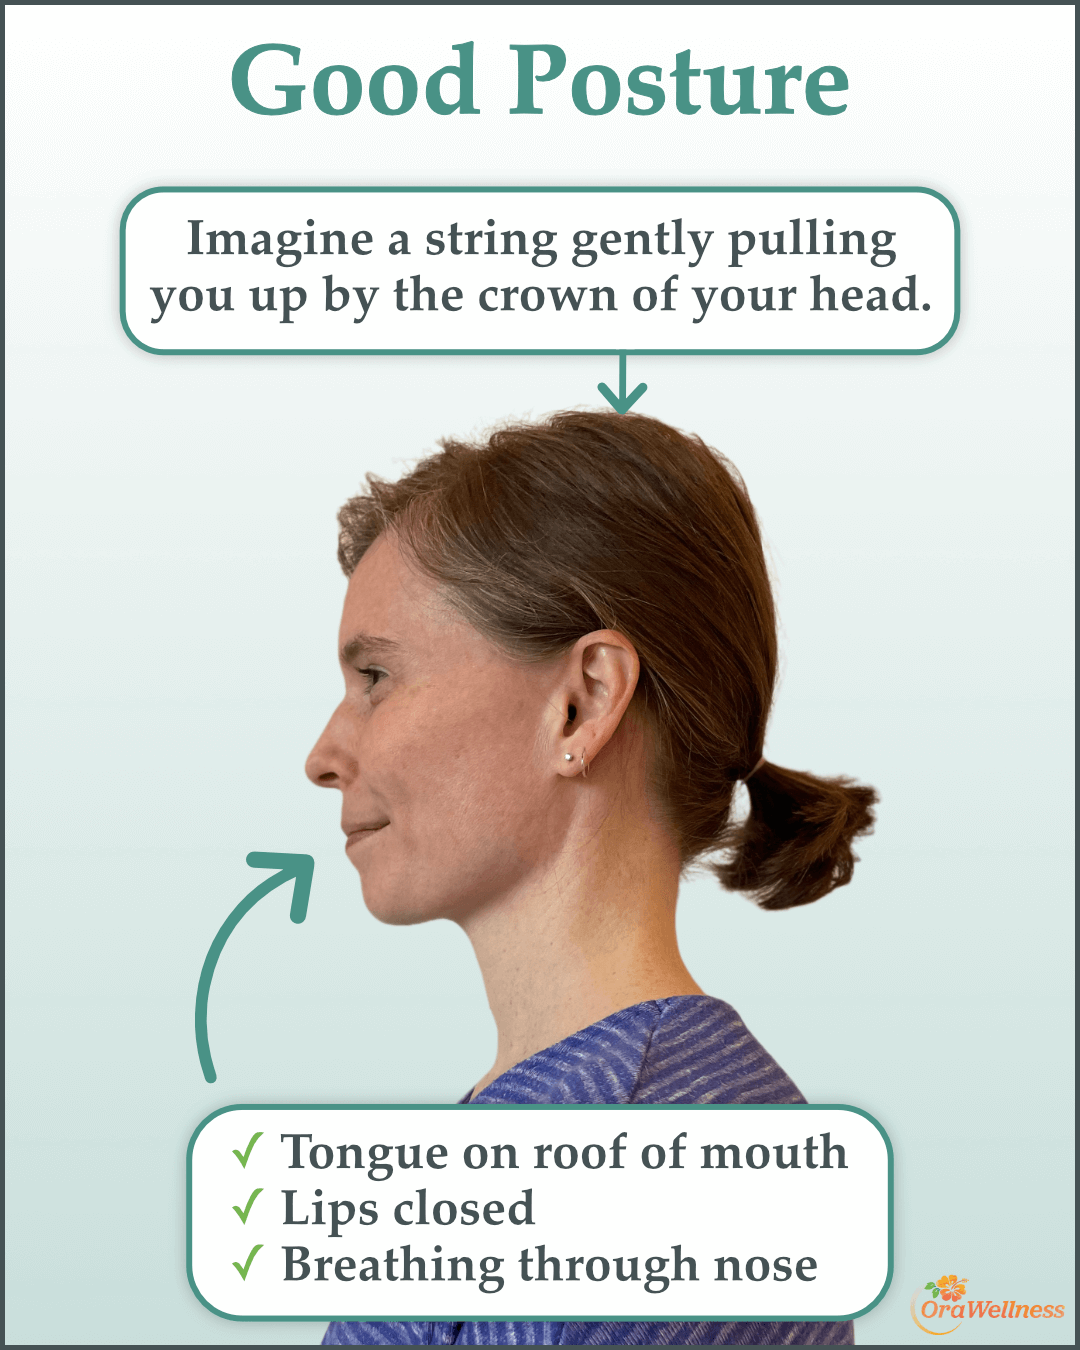 Good Posture / Imagine a string gently pulling you up by the crown of your head. / Tongue on roof of mouth / Lips closed / Breathing through nose